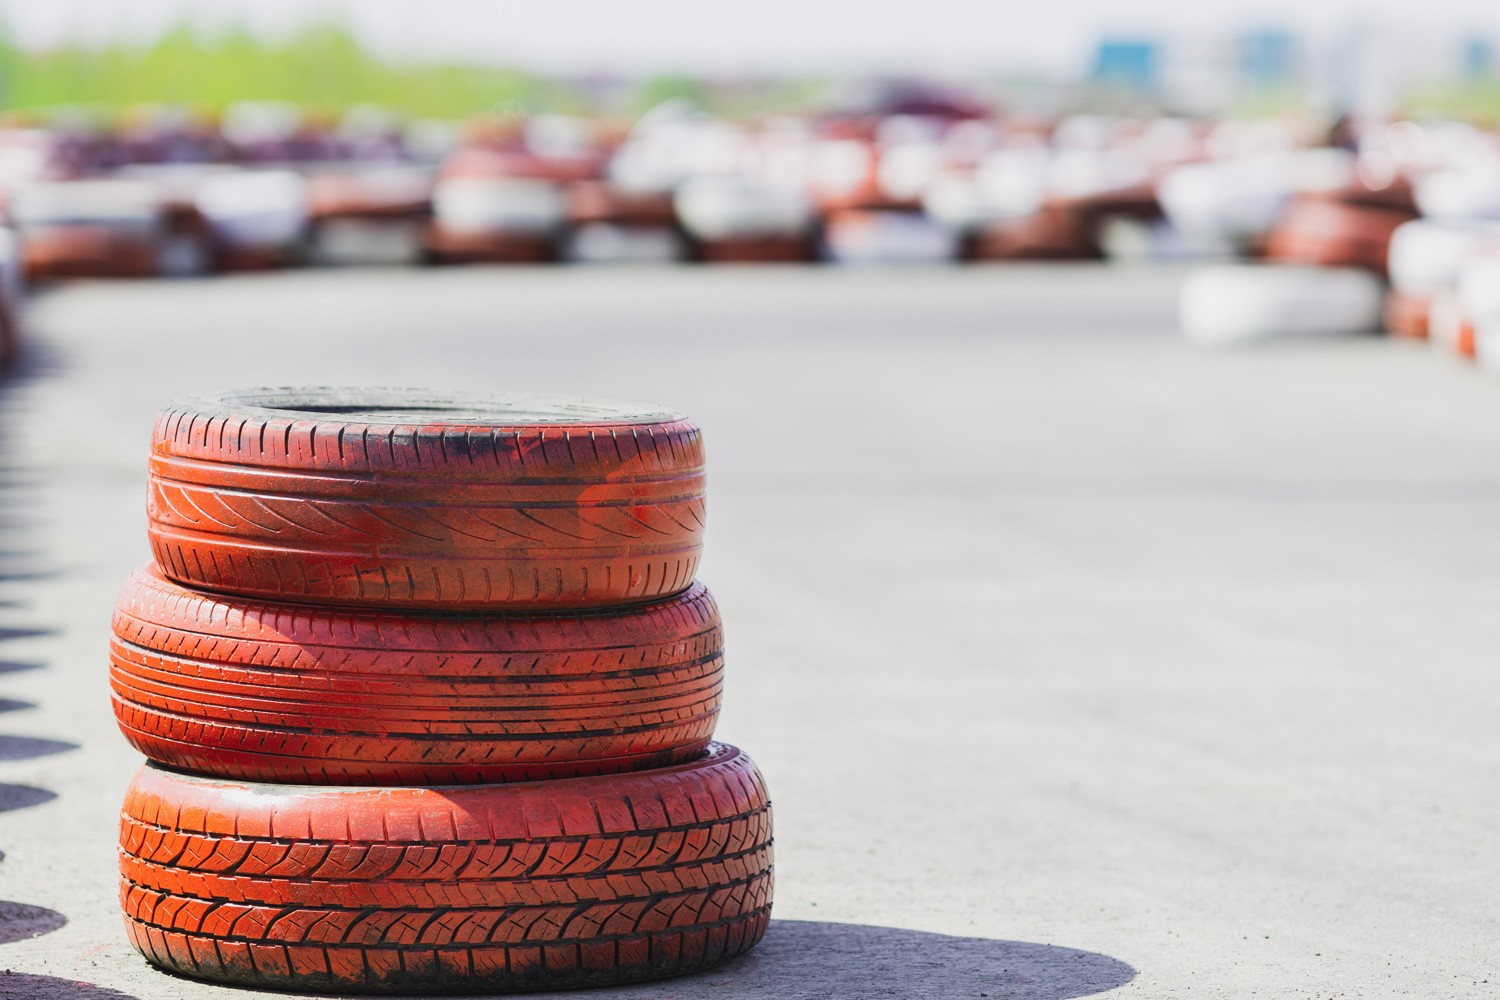 three car tires stacked on top of each other on an empty track race track, no one, pandemic empty tracks